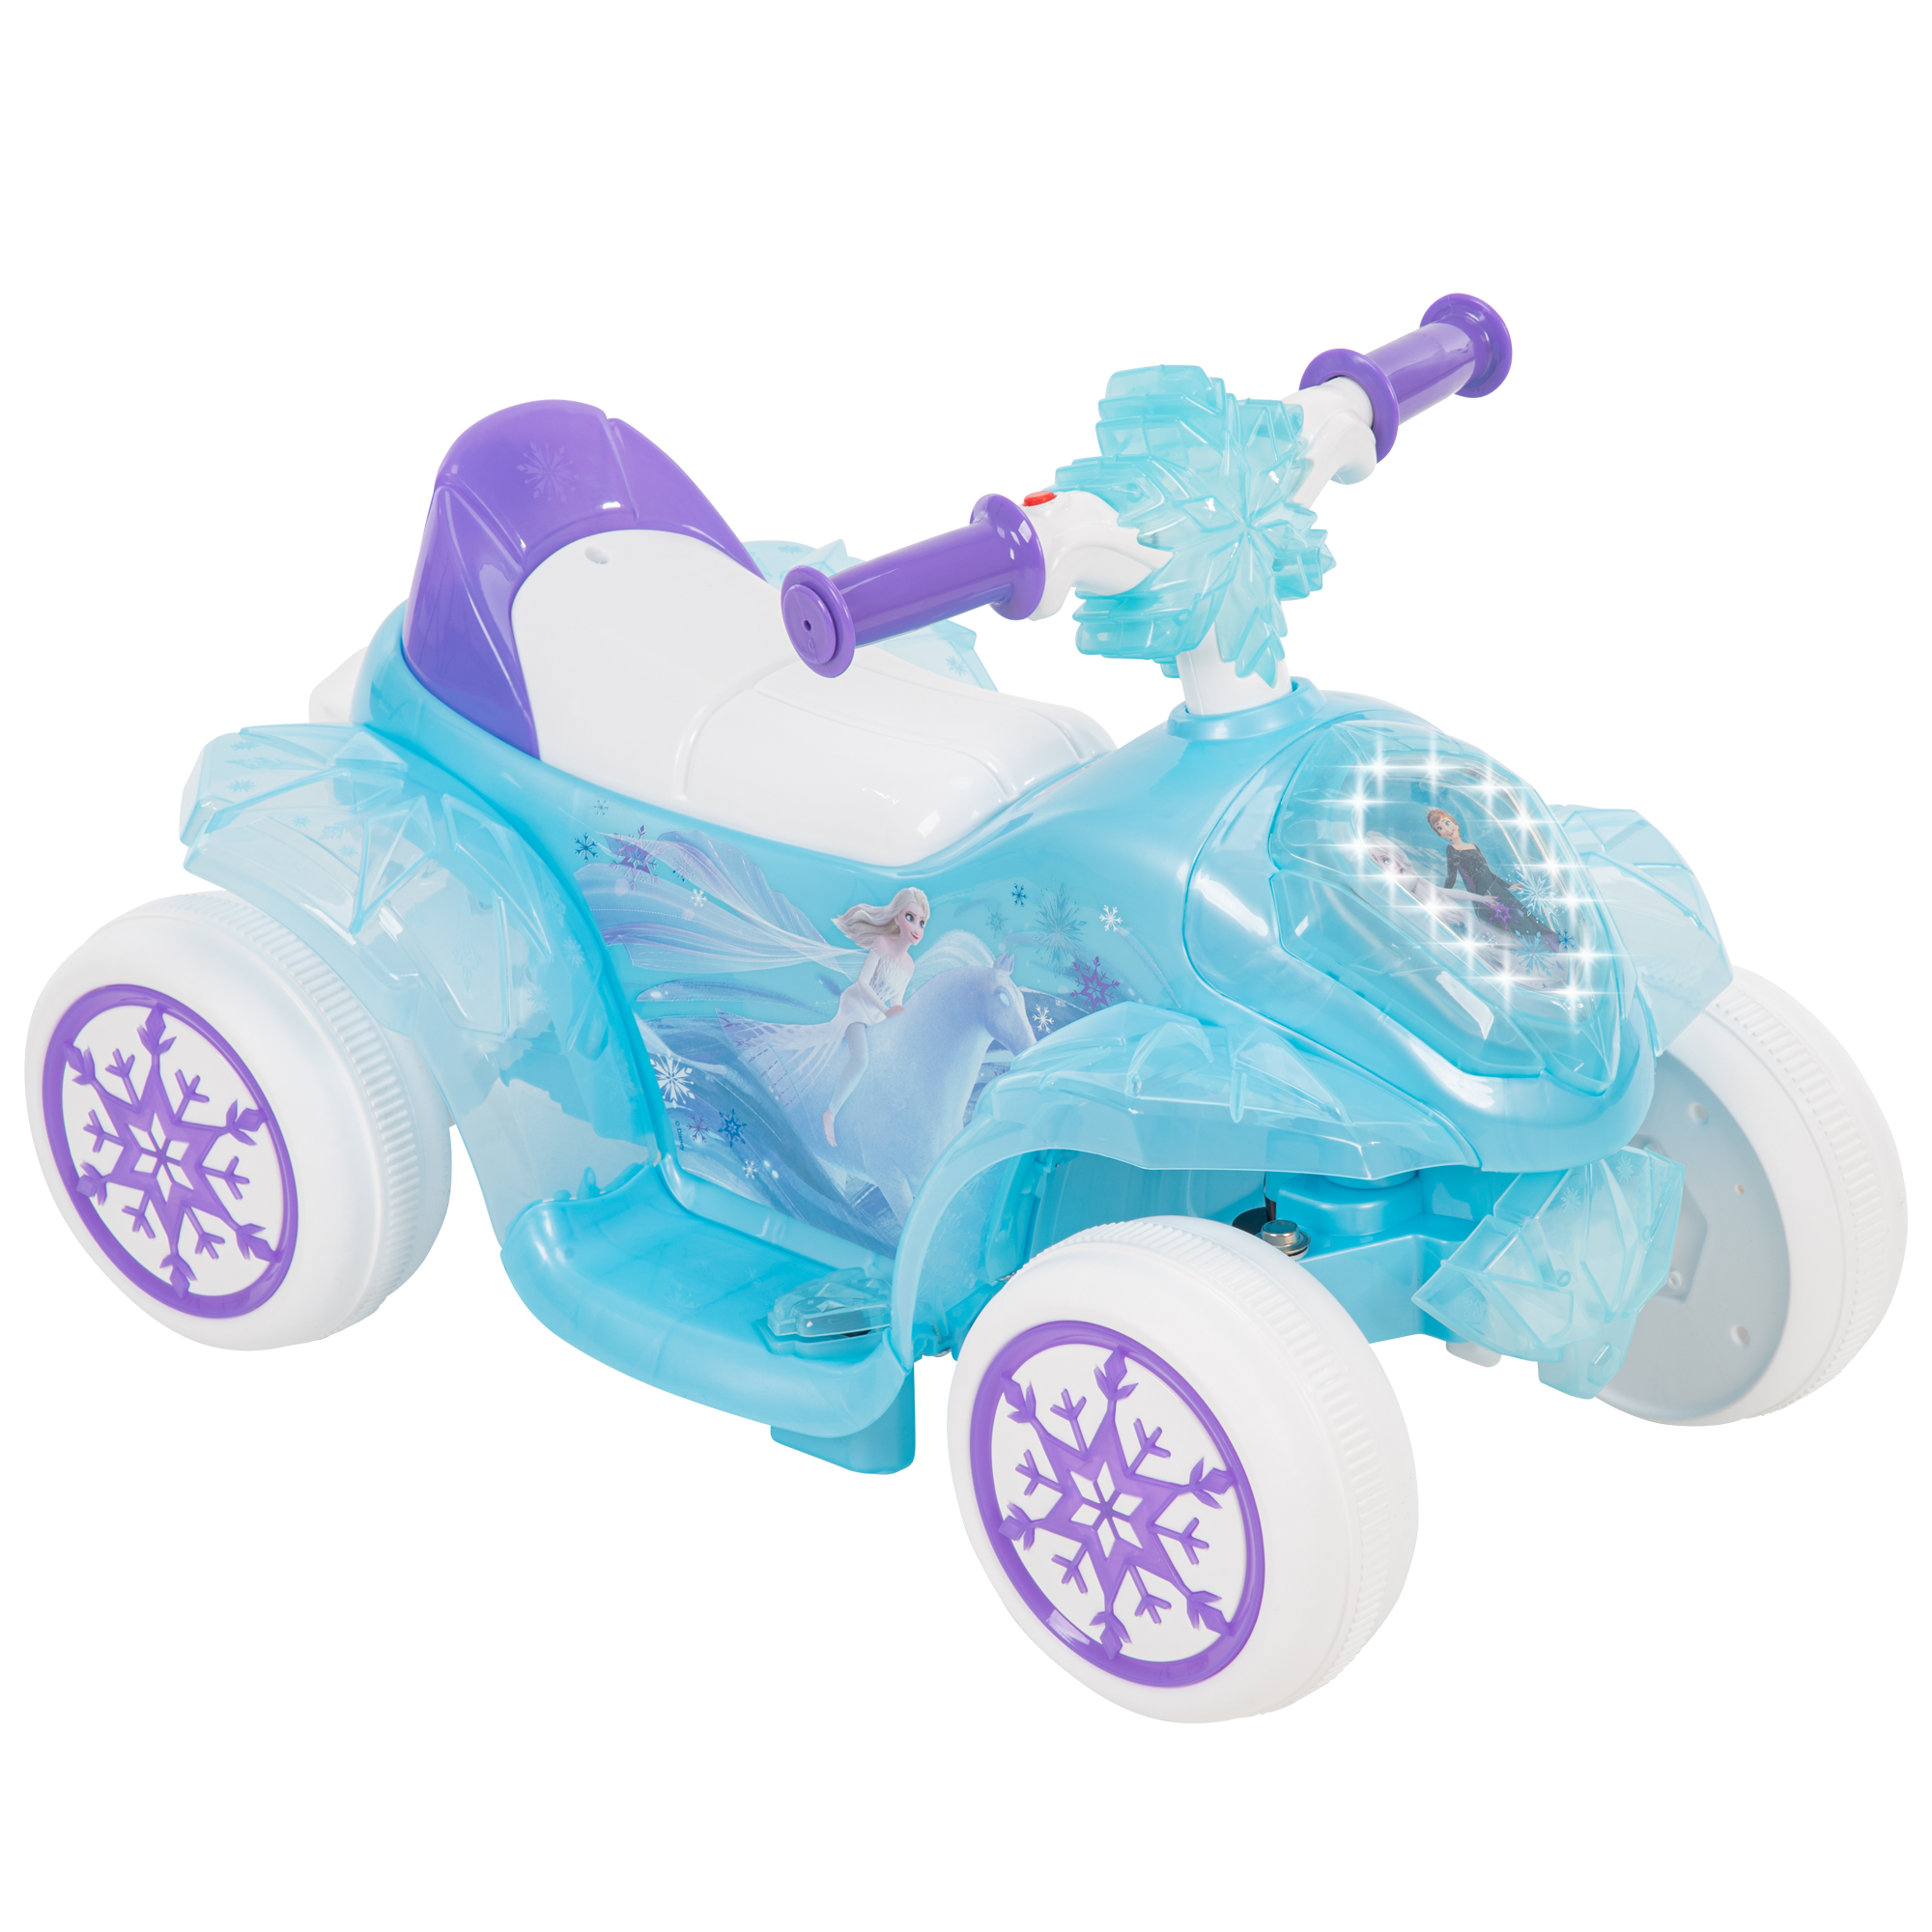 Disney Frozen 6 Volts Electric Ride-on Quad for Girls, Ages 1.5+ Years, by Huffy - image 2 of 15